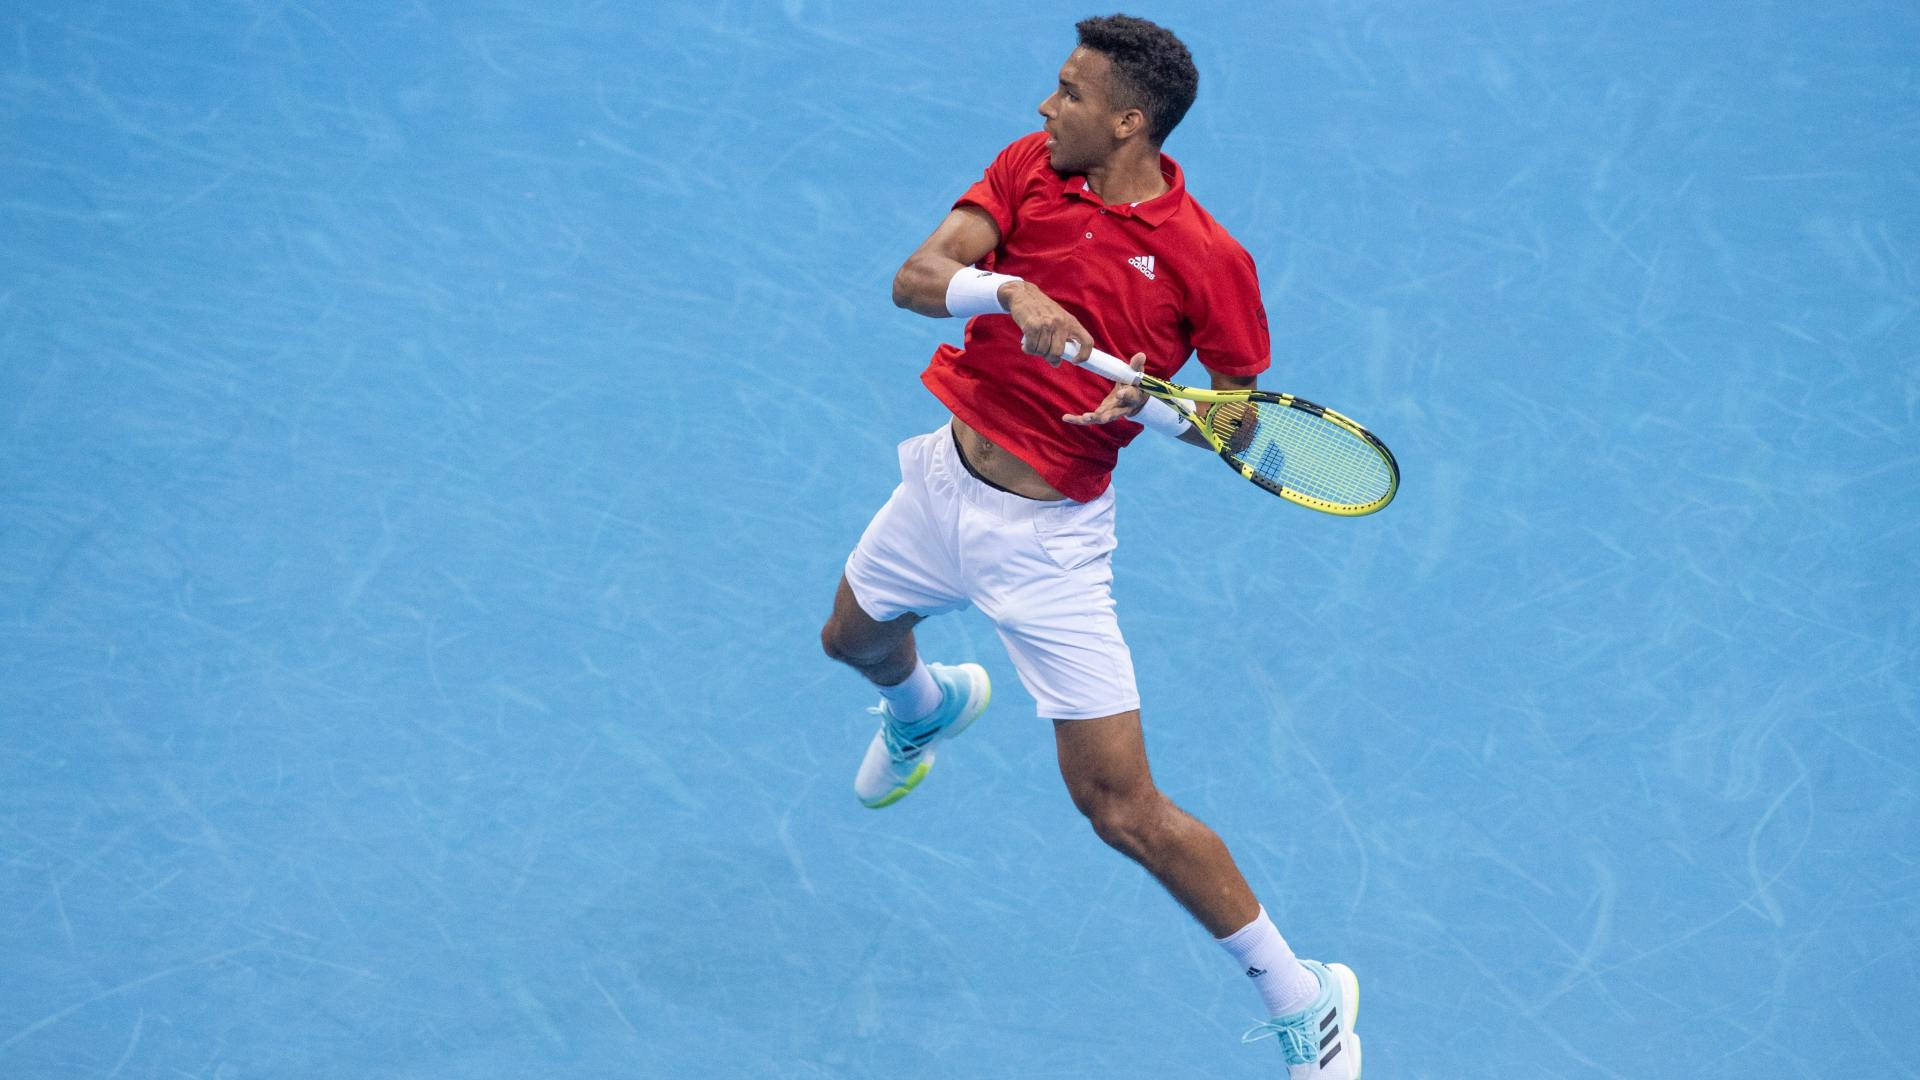 Caption: Professional Tennis Player Felix Auger Aliassime Showcasing His Footwork Skills Off The Court Background